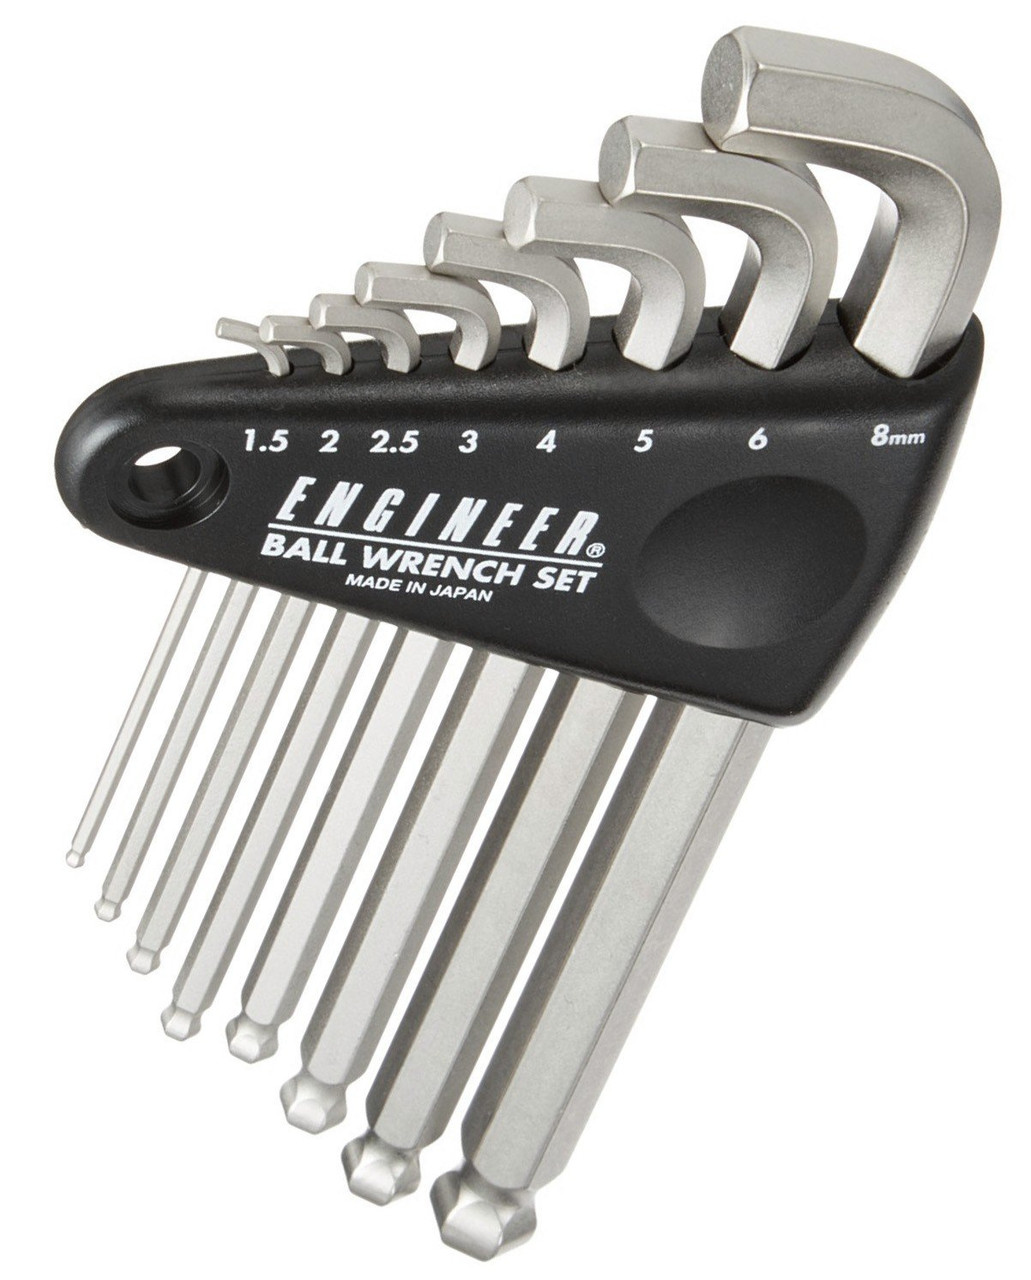 engineer twh-01,02 small mini sized metric ALLEN KEY set hex wrench set Japanese 